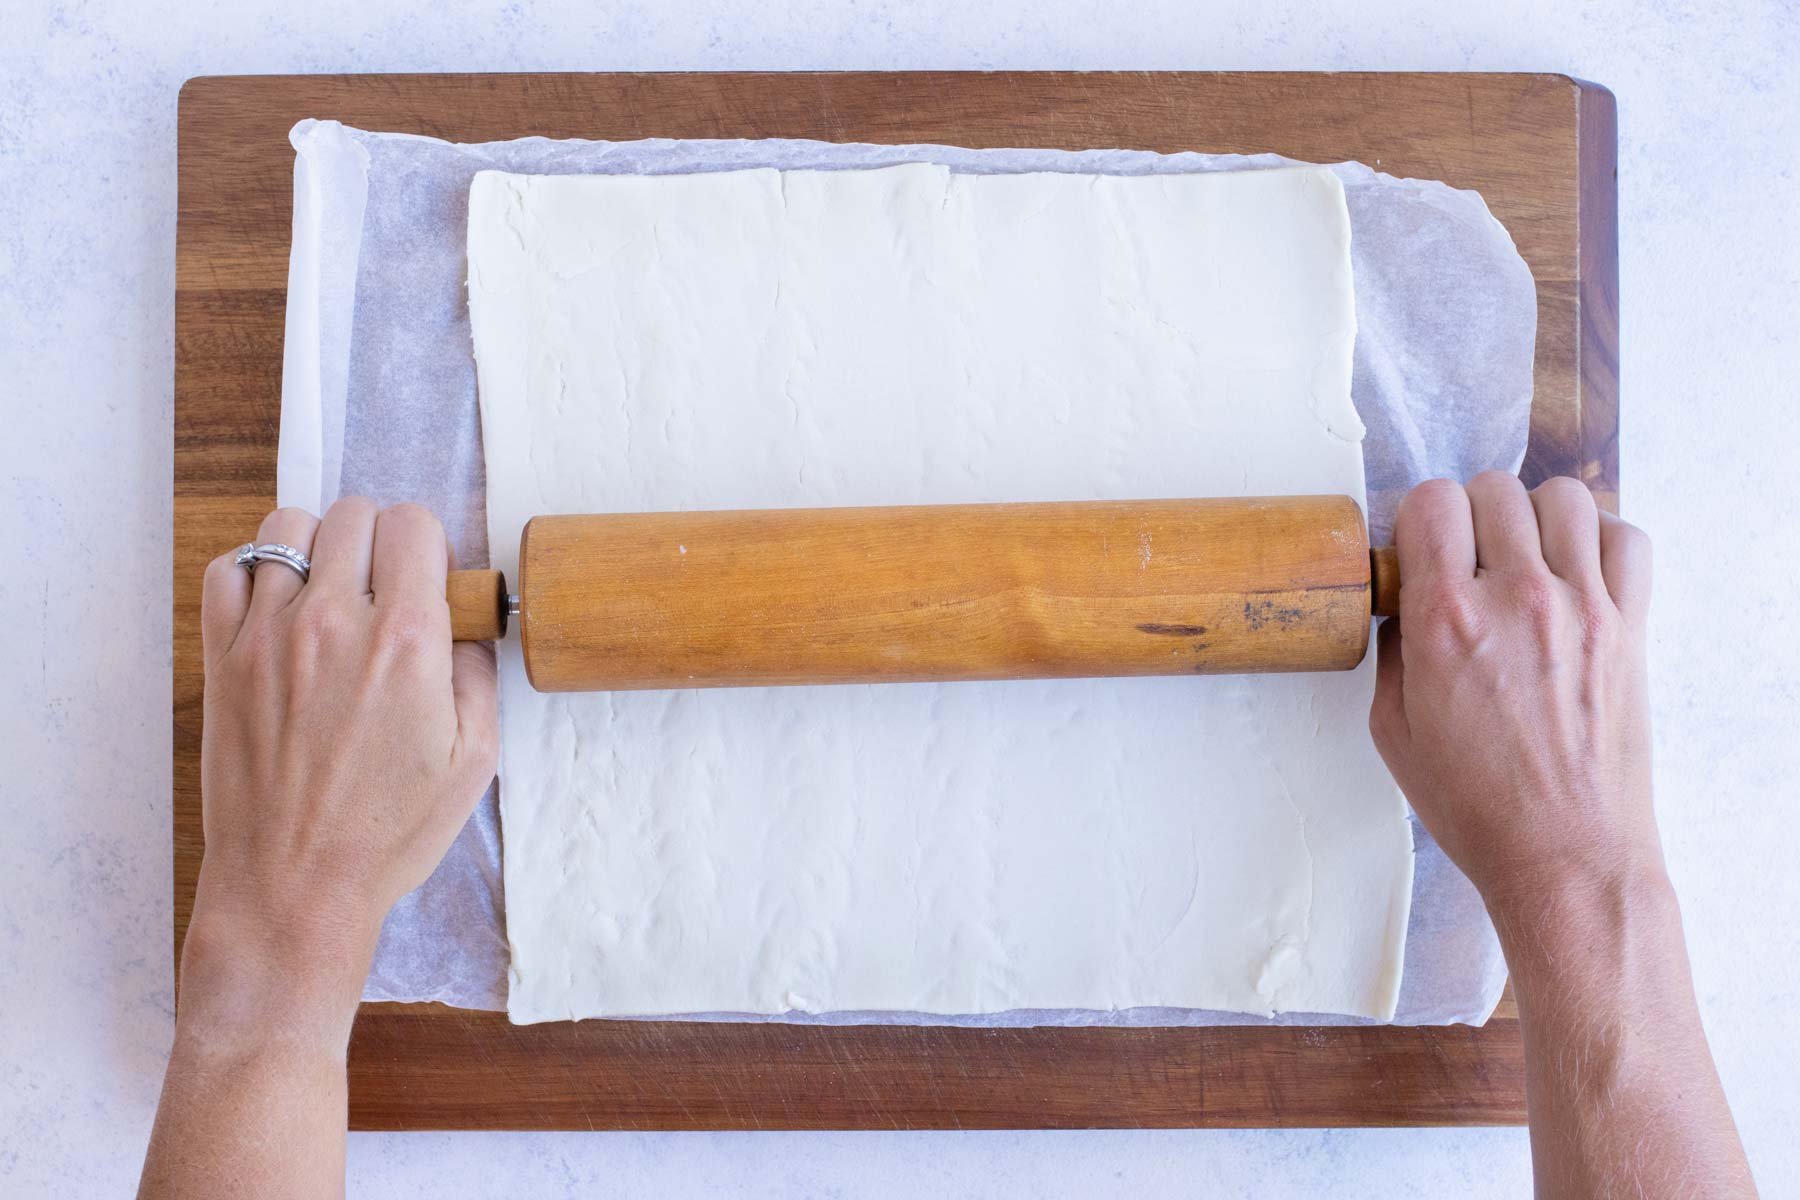 Puff pastry is rolled out with a rolling pin.